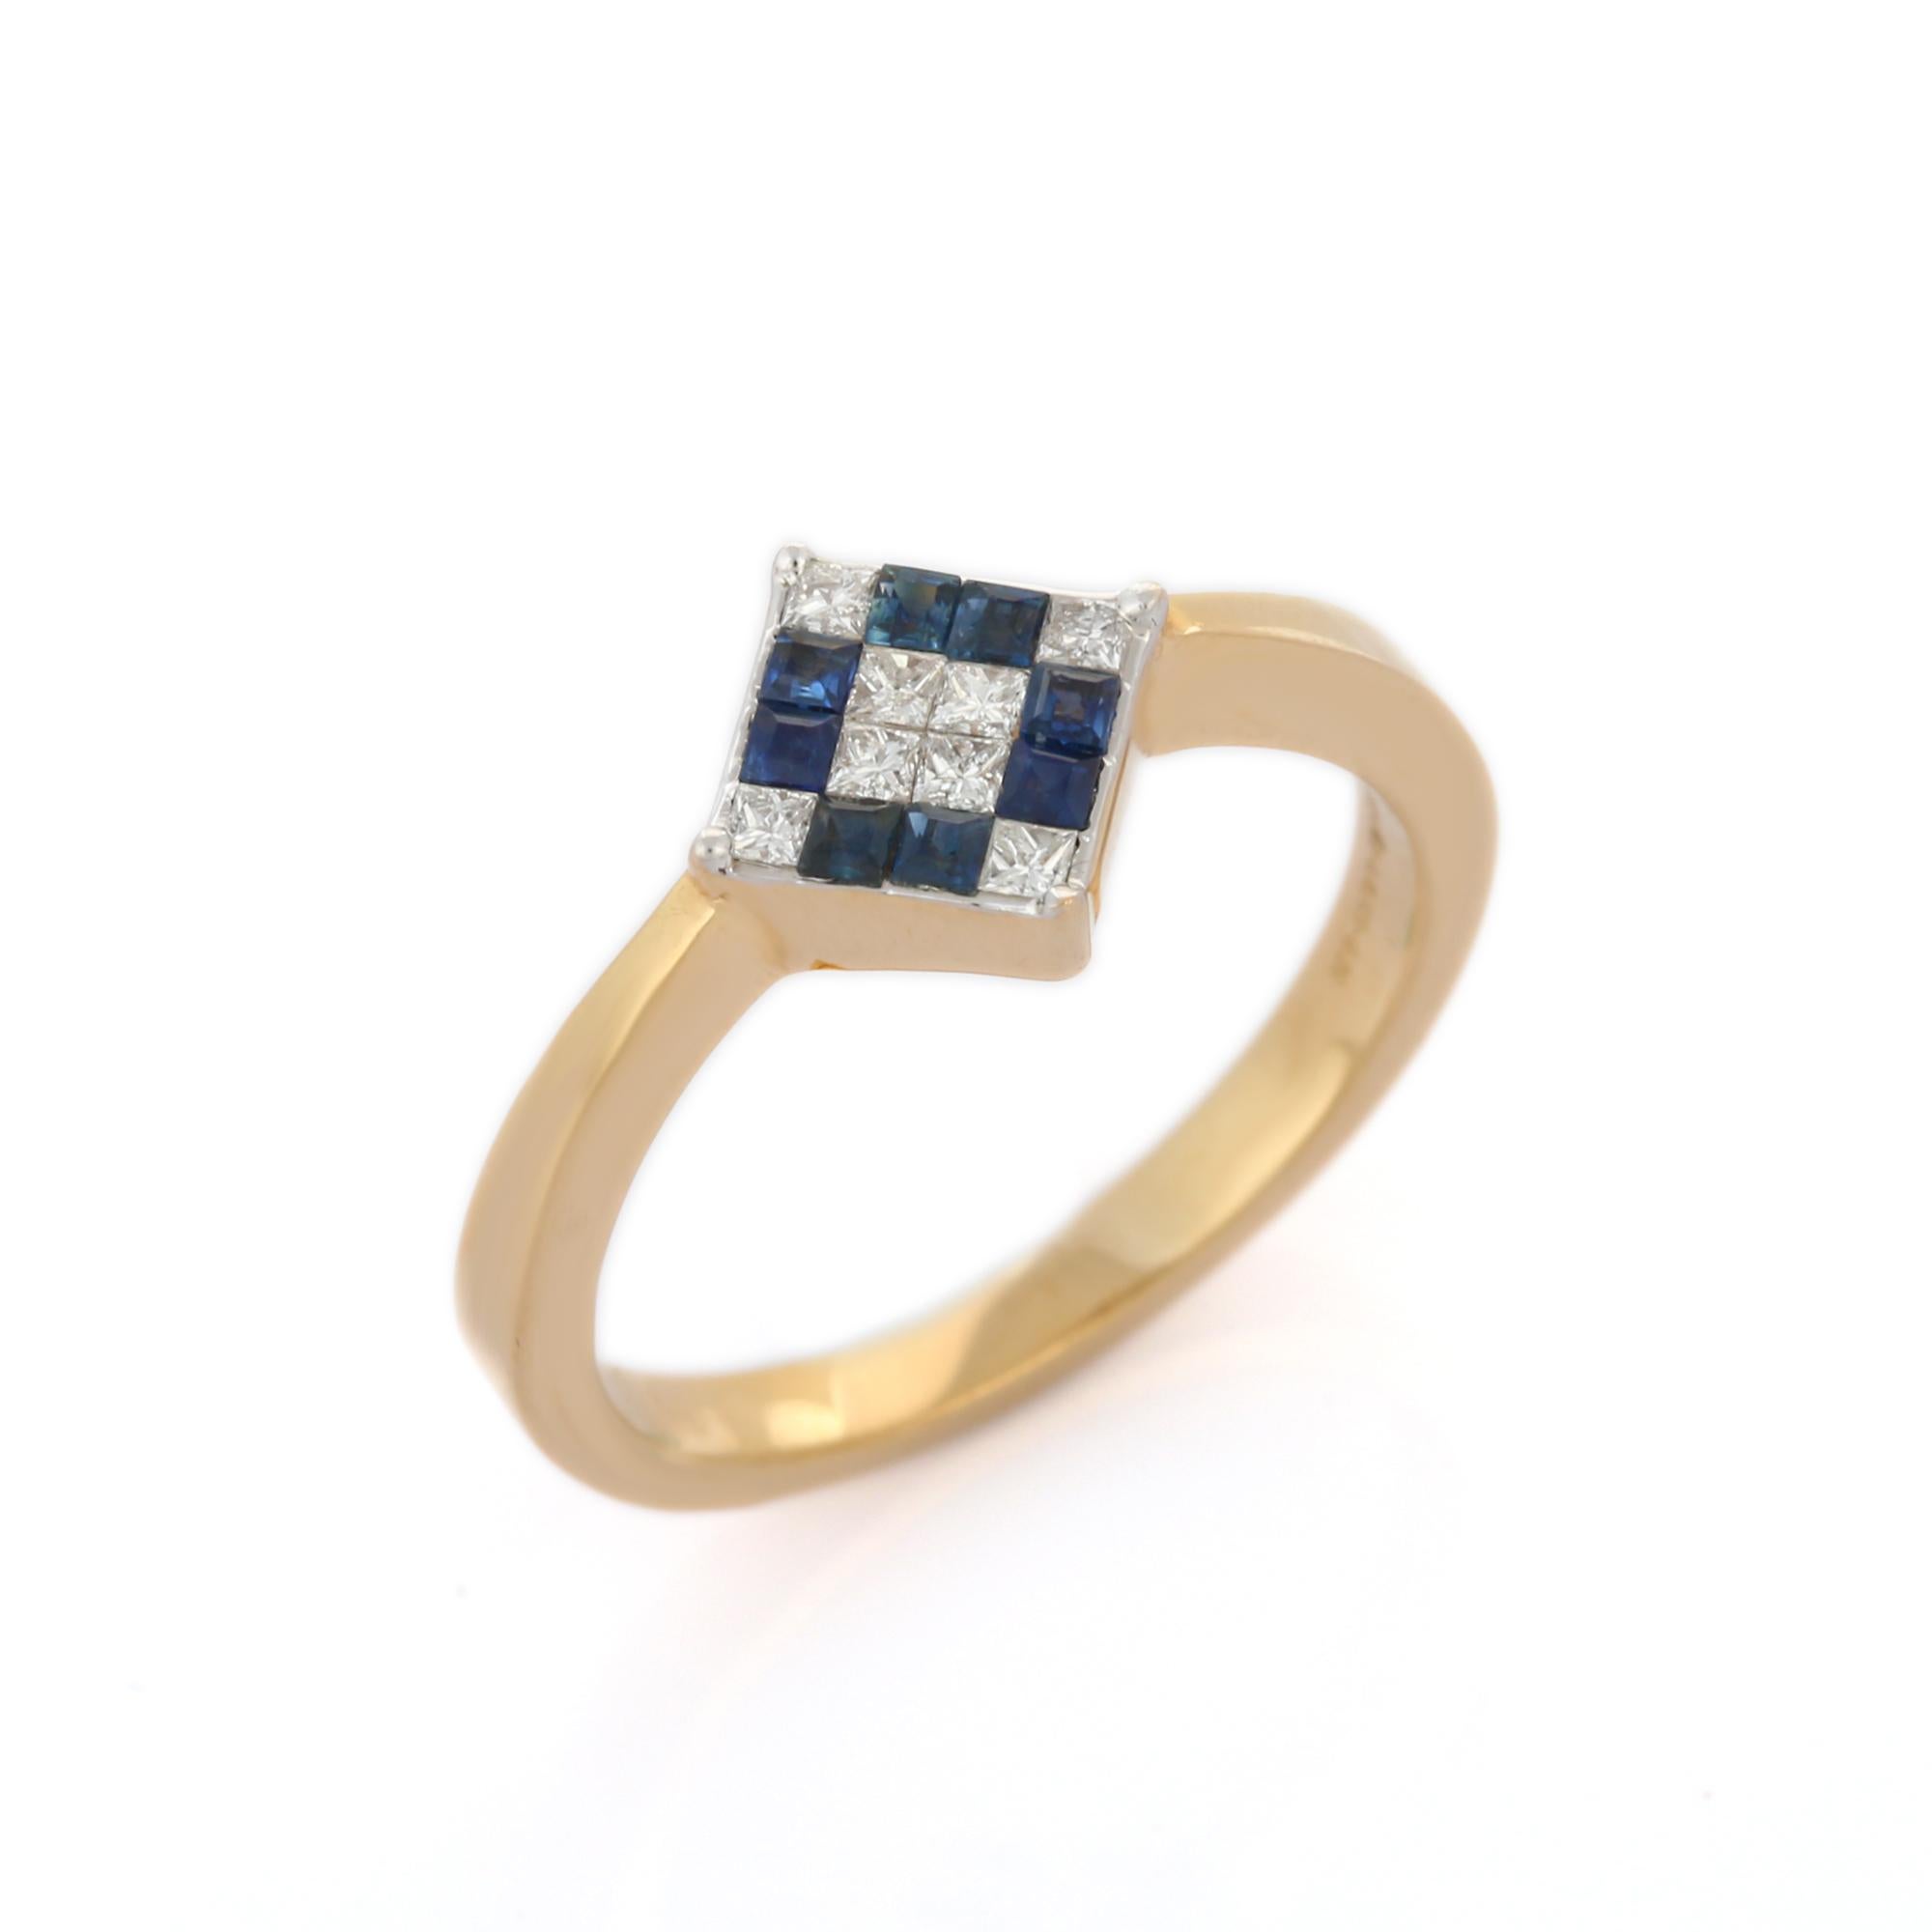 For Sale:  Blue Sapphire and Diamond Square Ring Studded in 18k Solid Yellow Gold  5